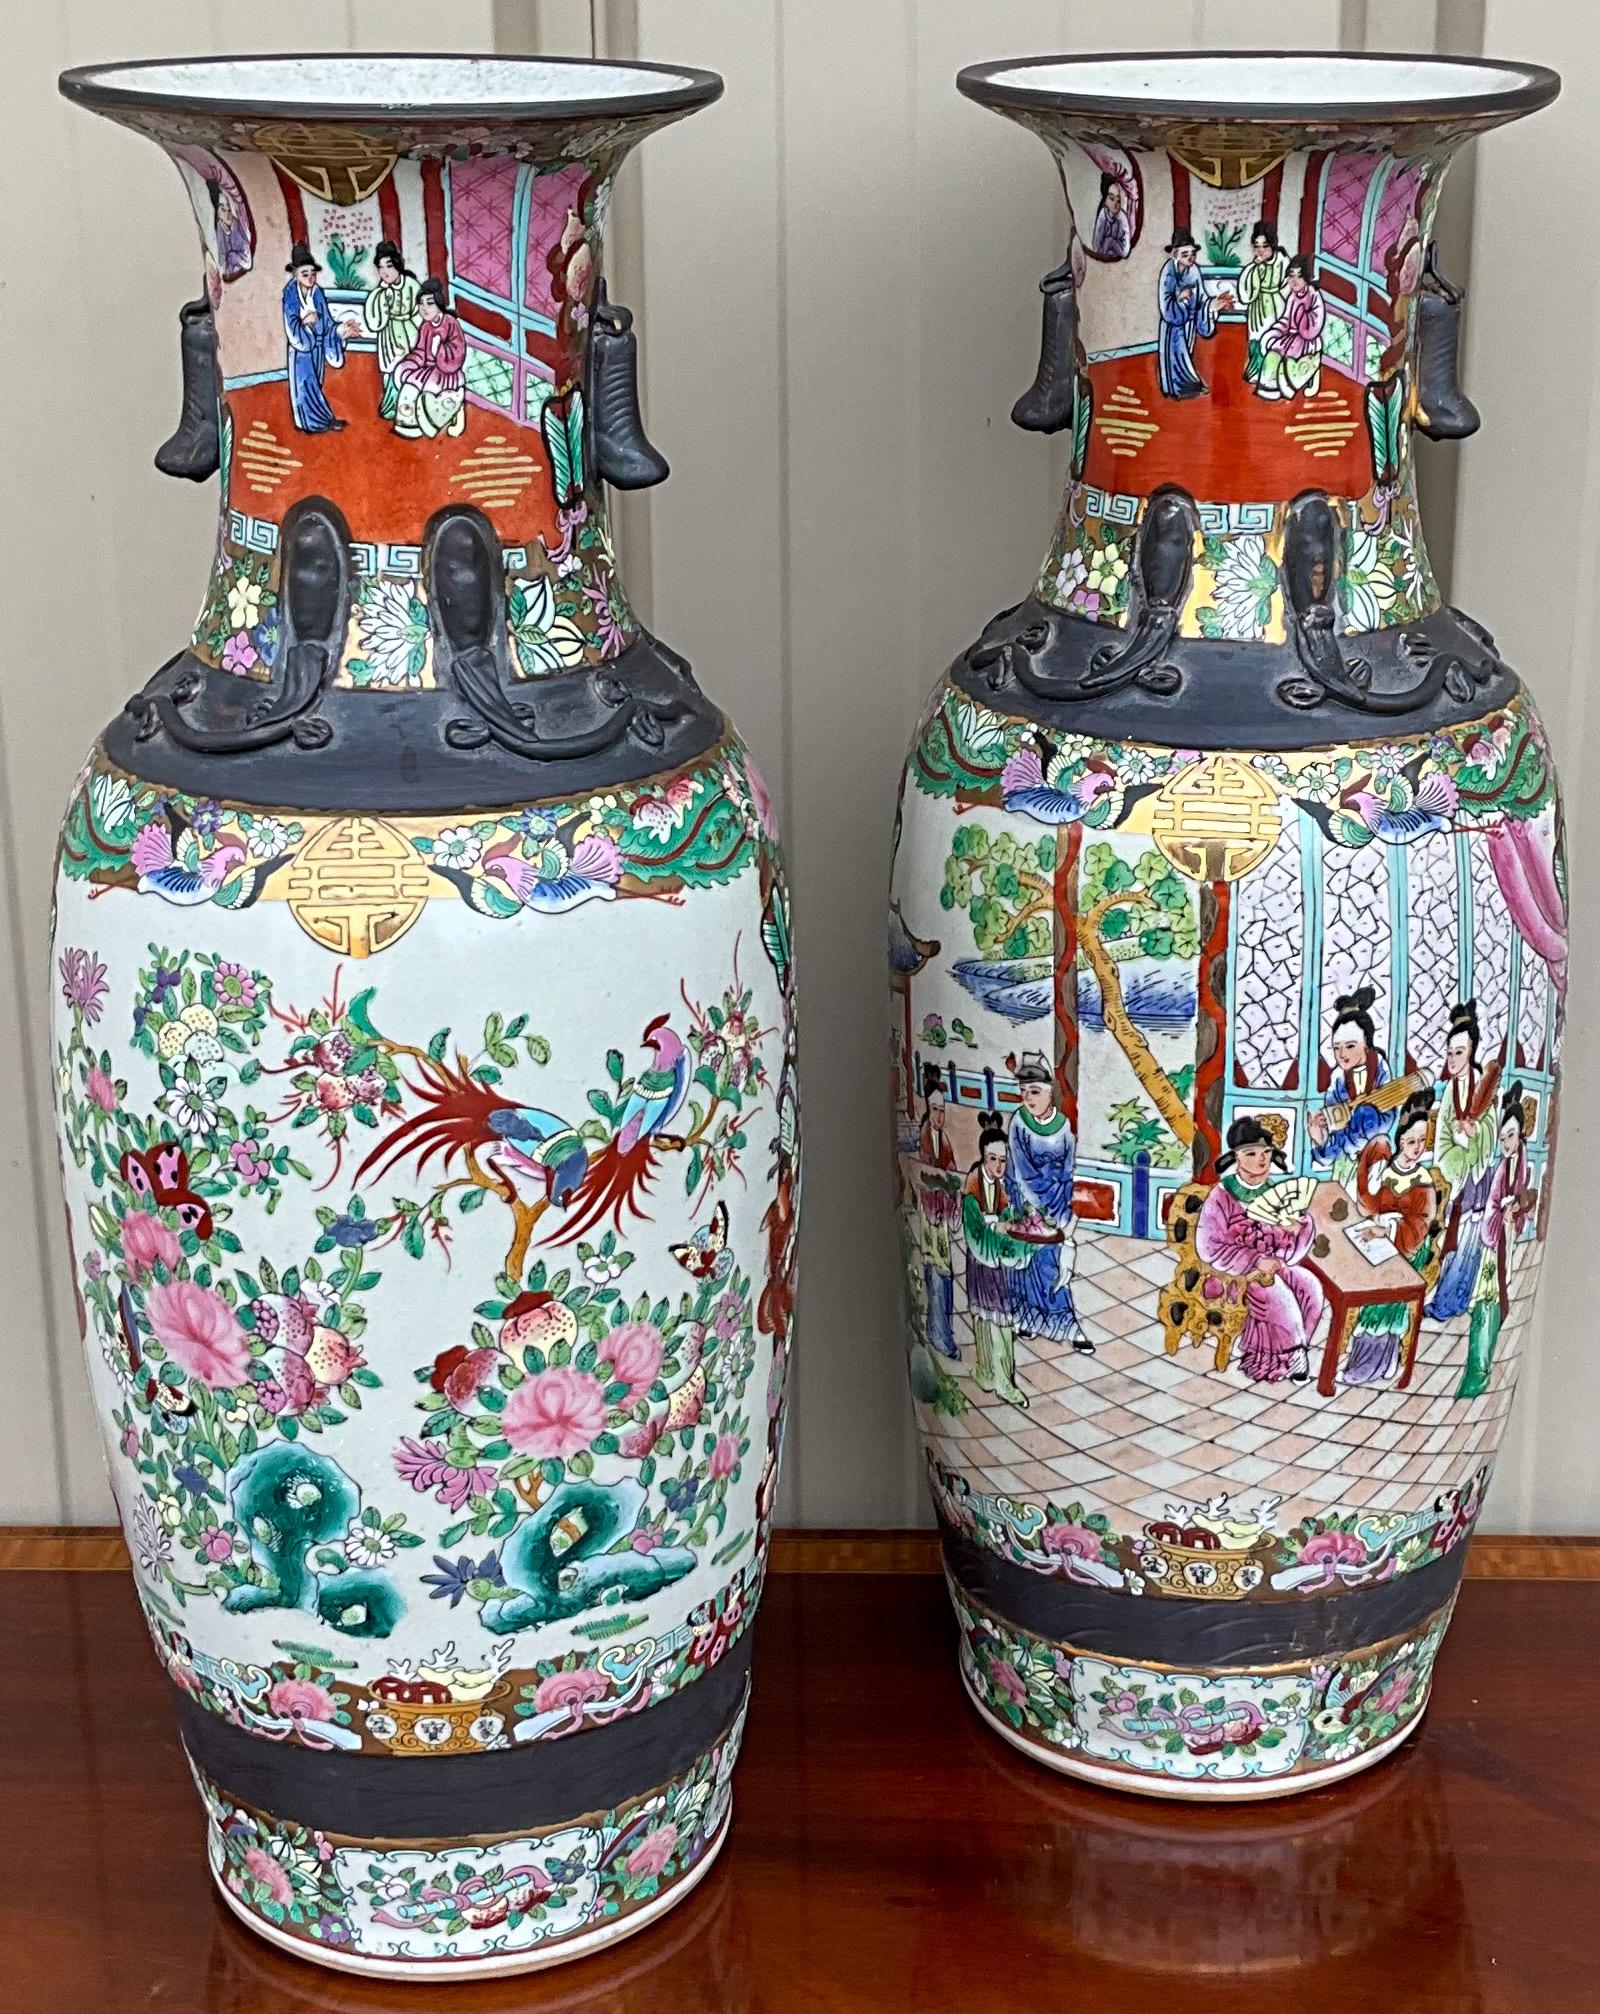 These are lovely Chinese Export style large scale vases. They are in very good condition and are marked on the underside. Note the vibrant colors and pastoral scenes!